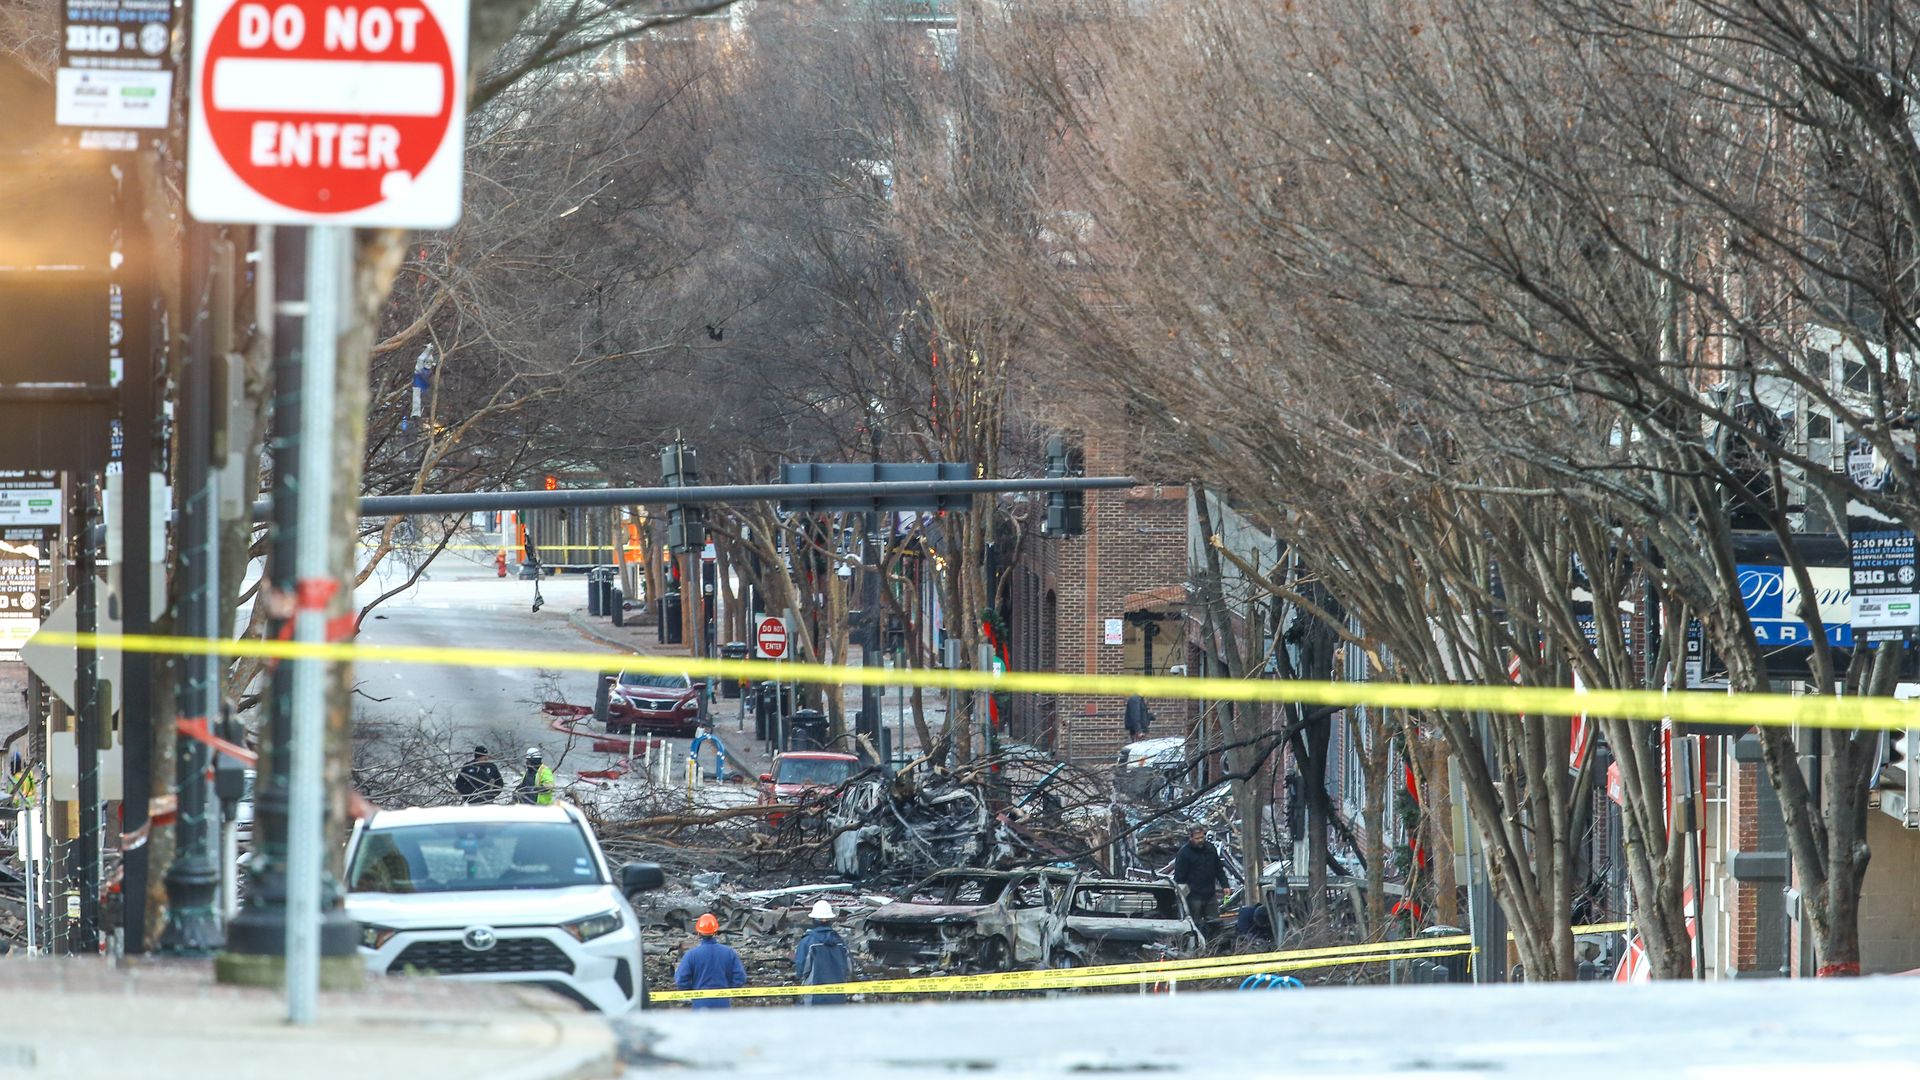 Police close off an area damaged by an explosion on Christmas morning on December 25, 2020 in Nashville, Tennessee. 